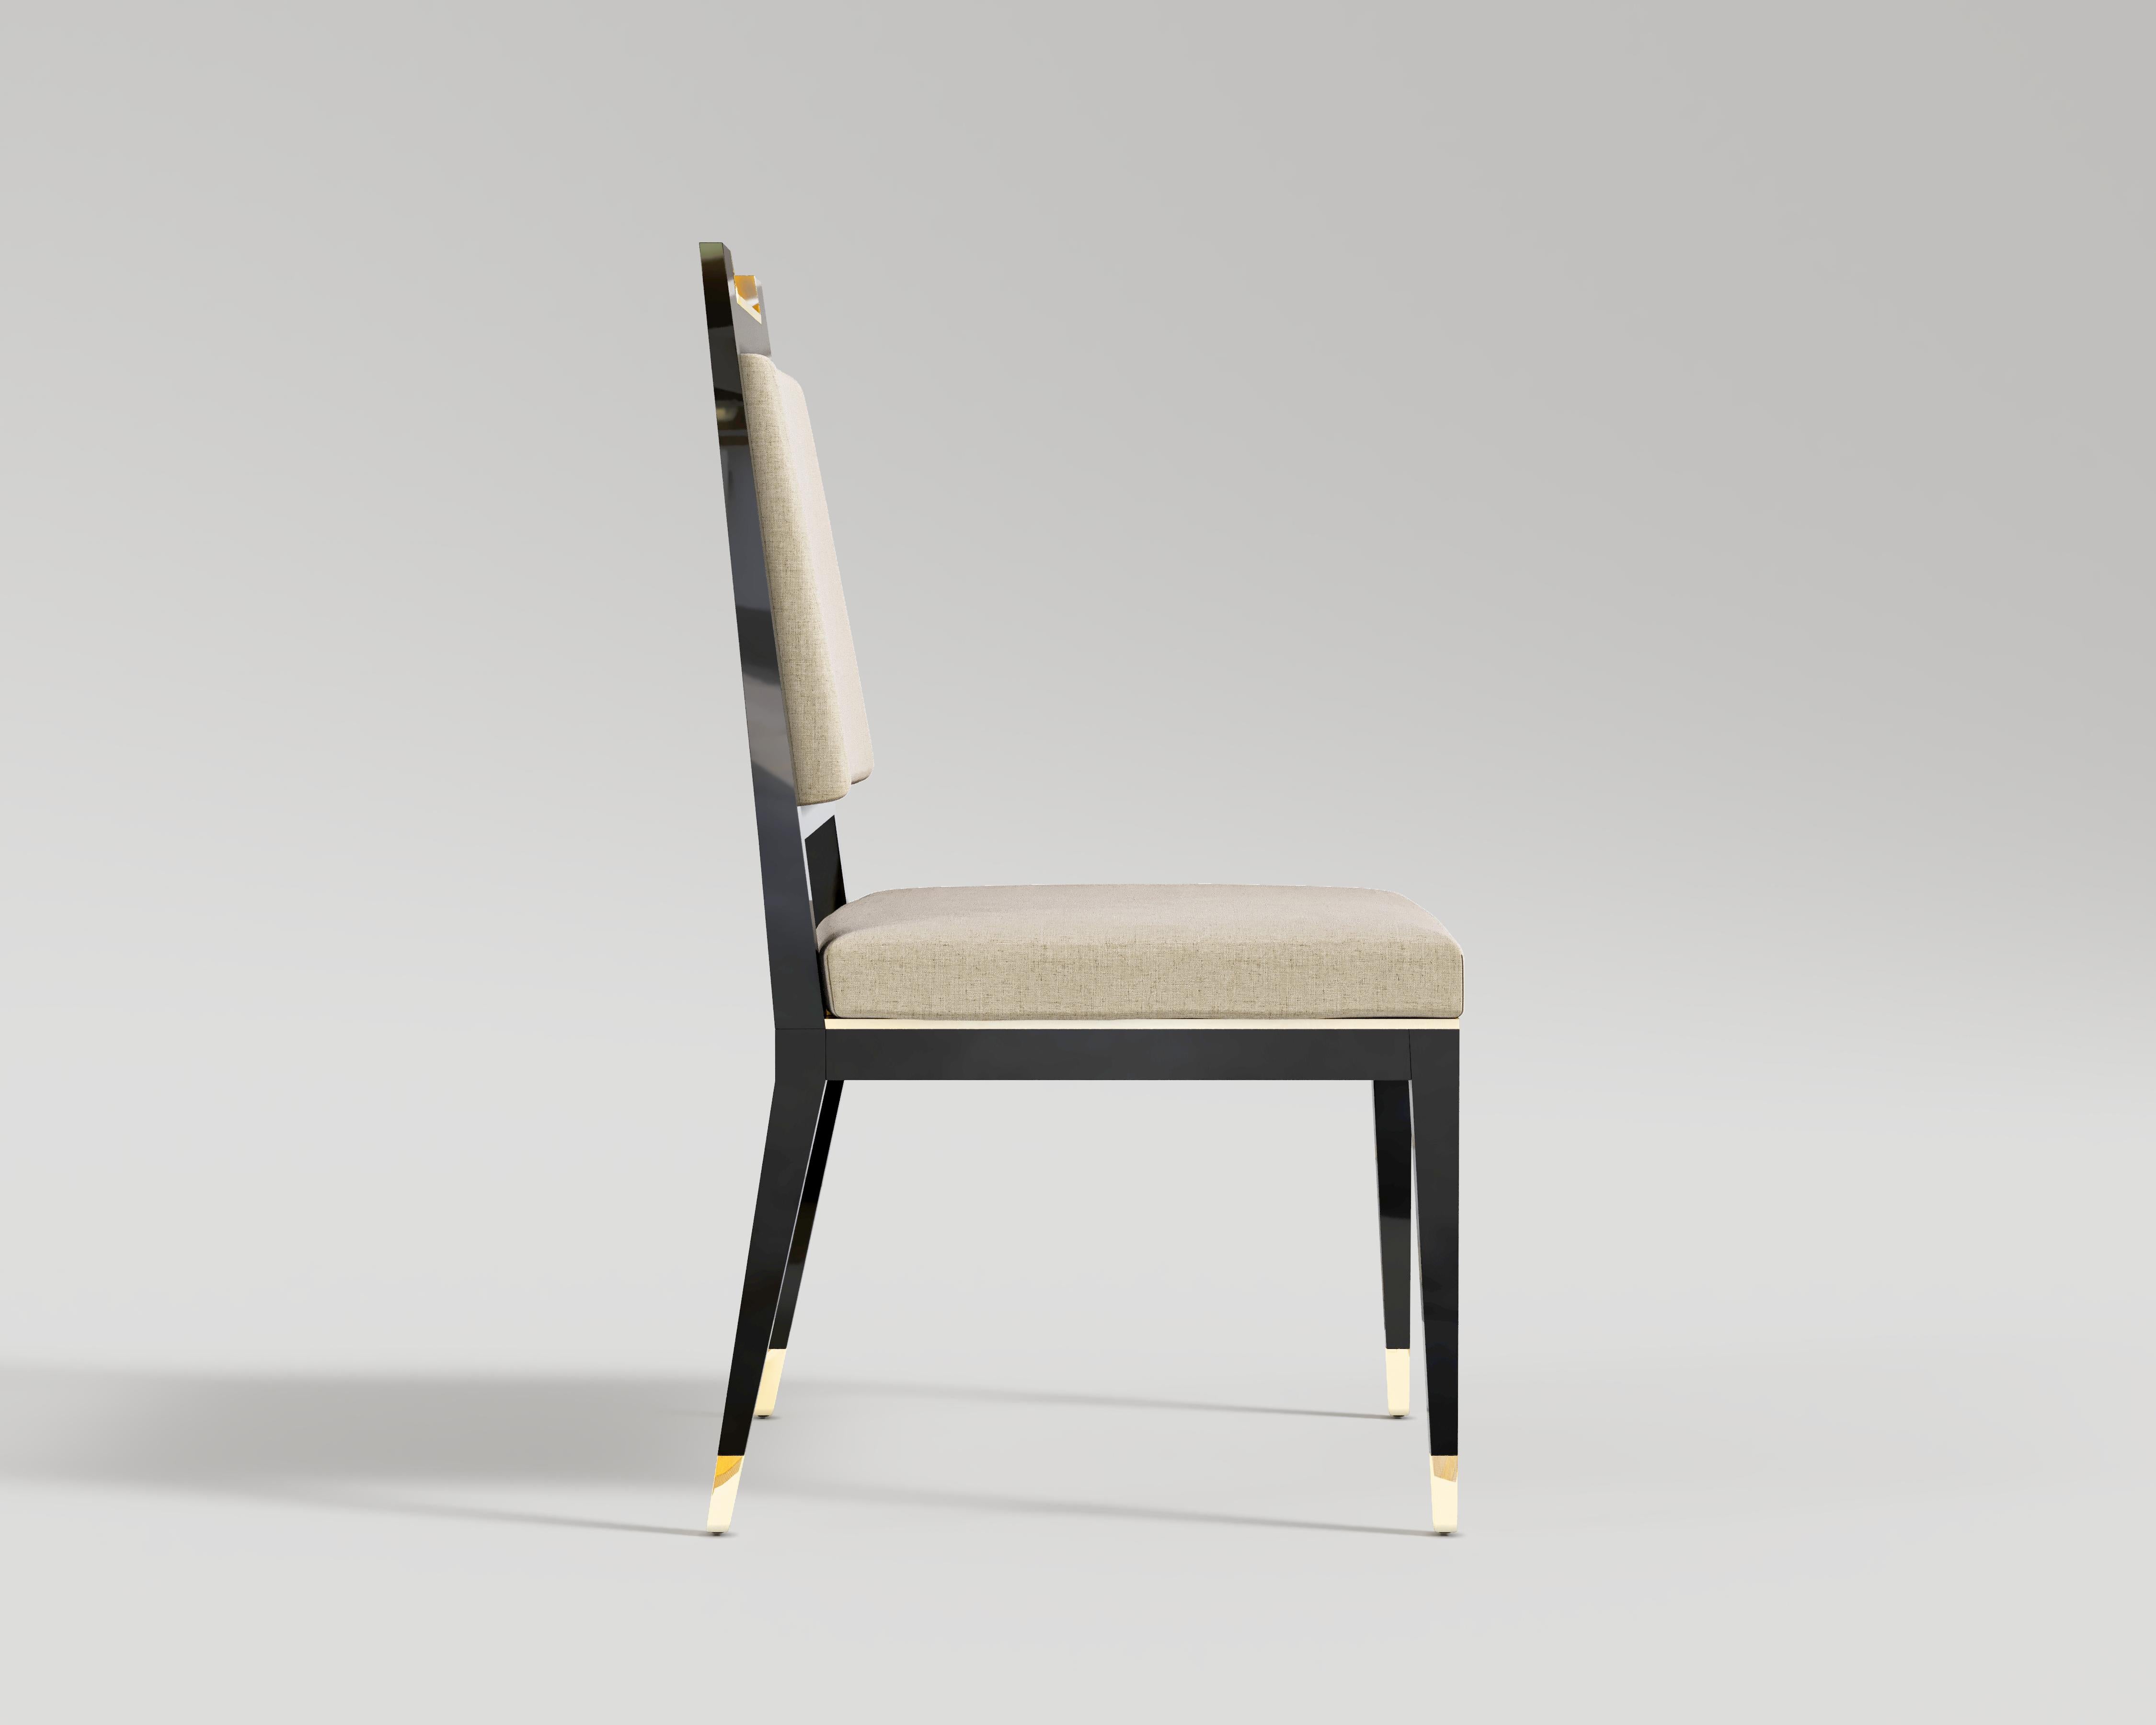 Palena Chair
Revealing its luxuriant character, the Palena invites you to delve into an atmosphere of modernity with its black lacquer body and polished bronze details. Pairing sumptuously plush upholstery with a contrasting metal base, the Palena